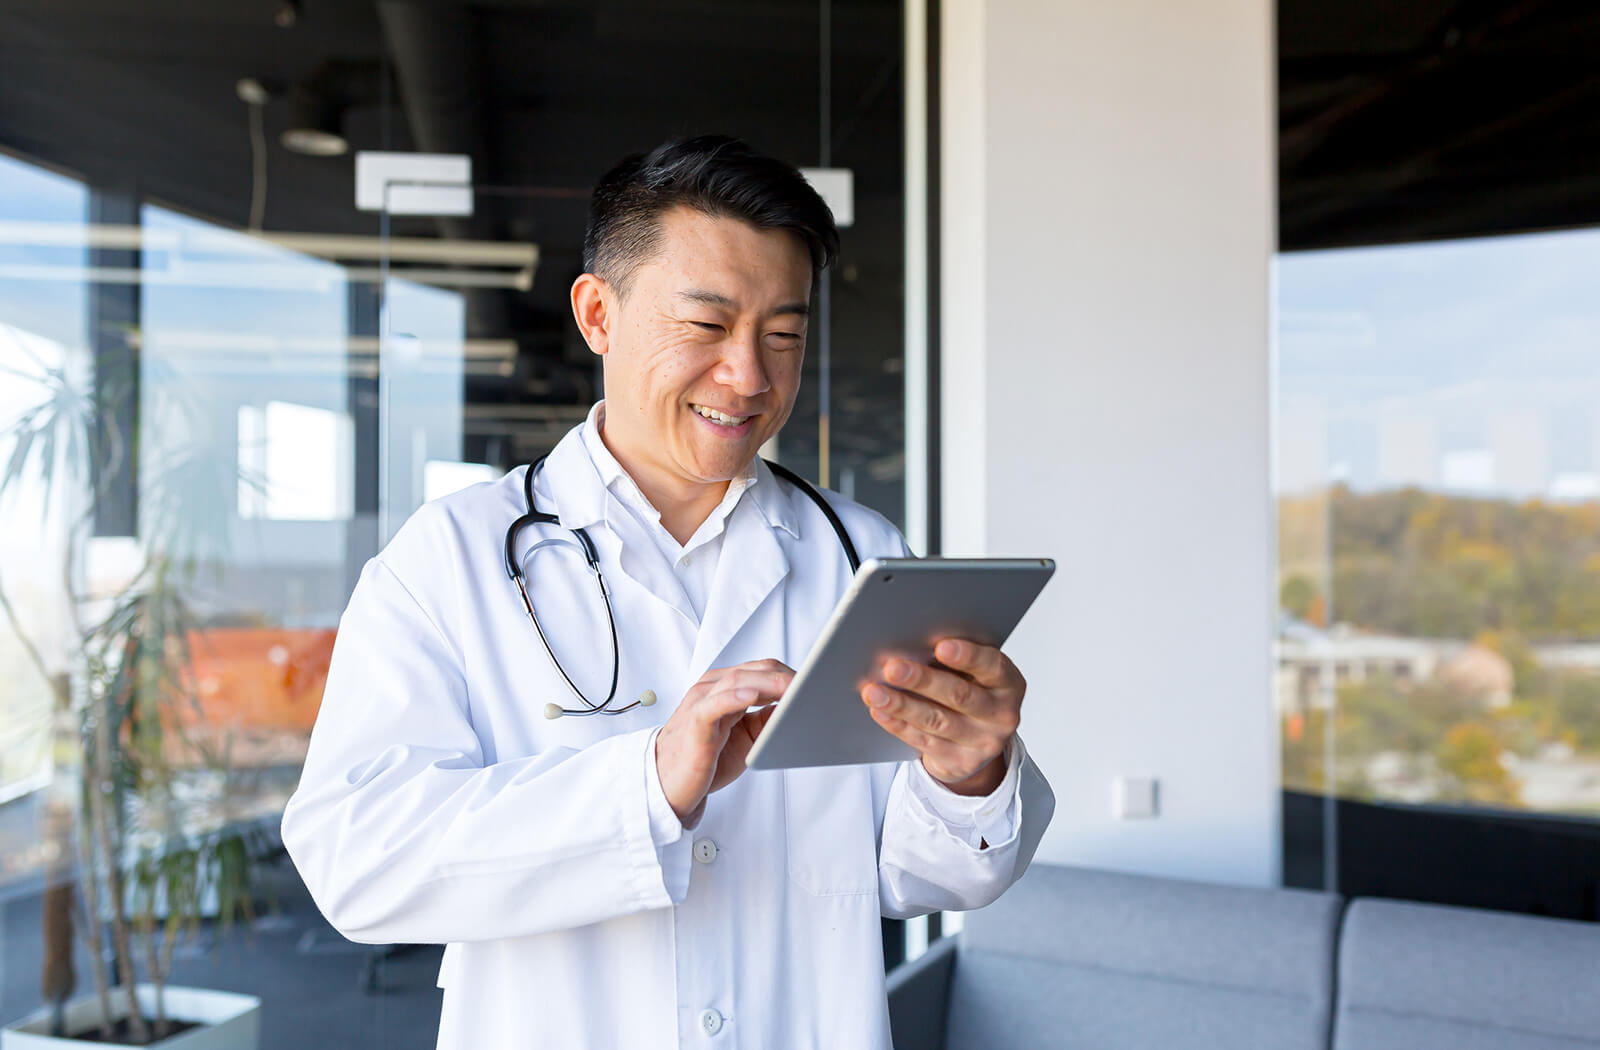 Cheerful doctor using tablet